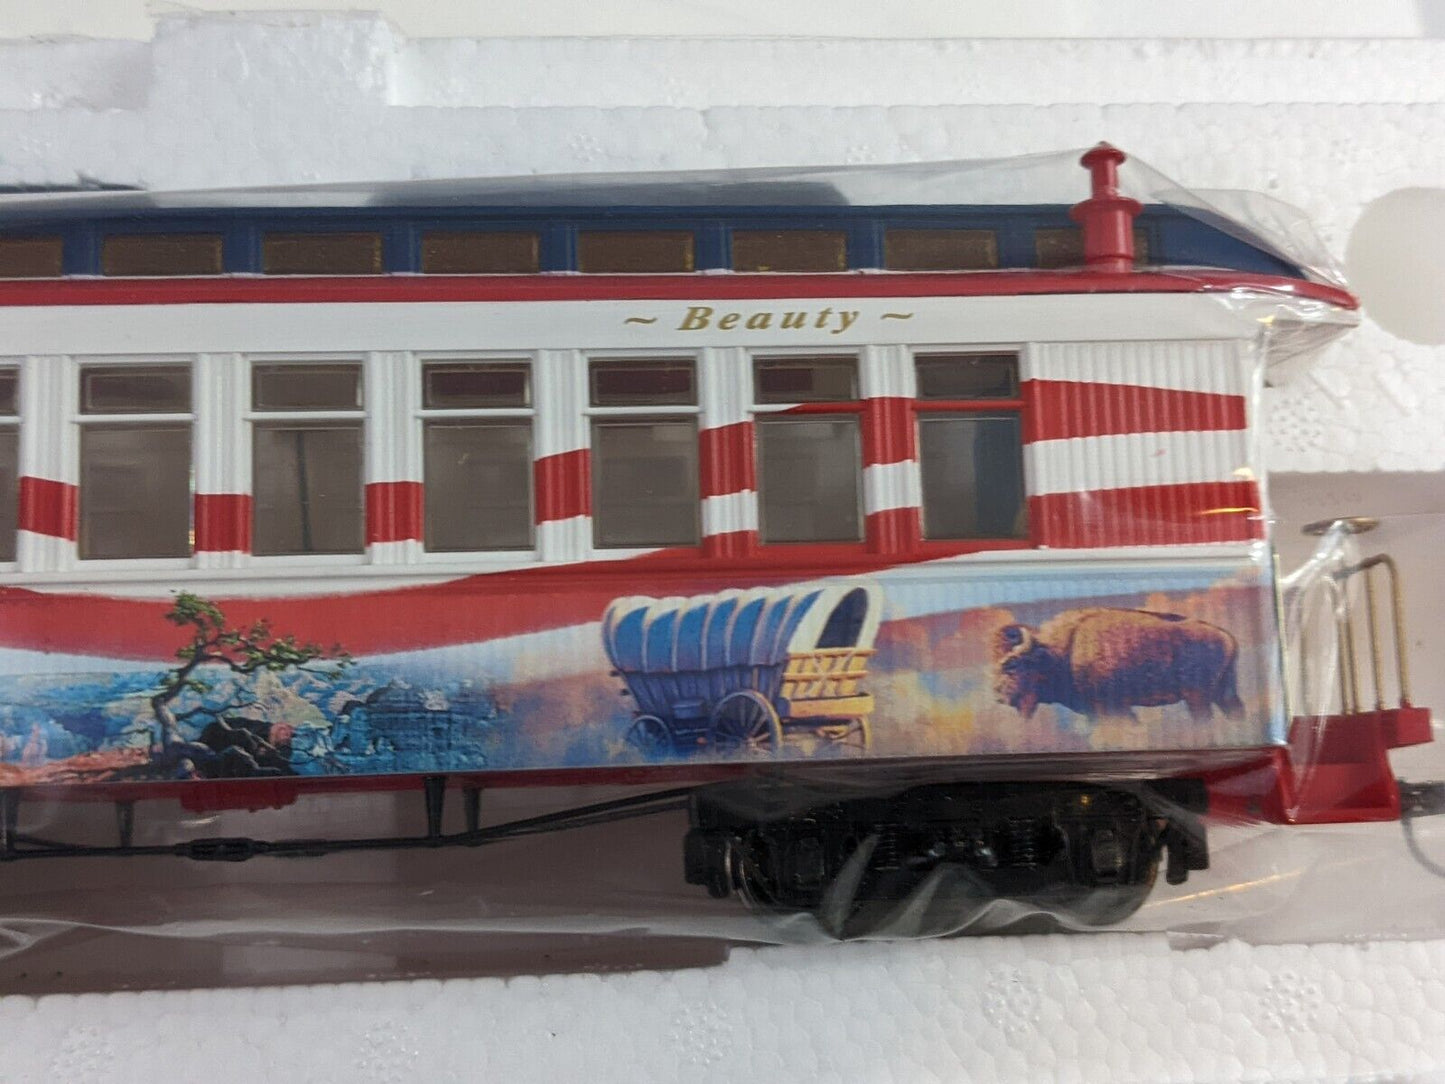 Hawthorne Village Discovery & Beauty Coach Car w/ Certificate of Authenticity